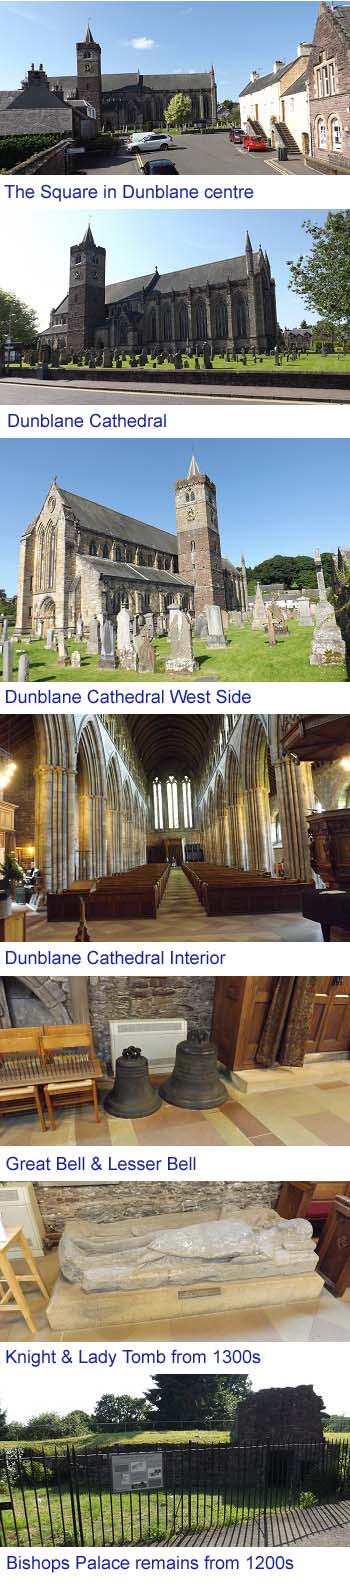 Dunblane Cathedral Images